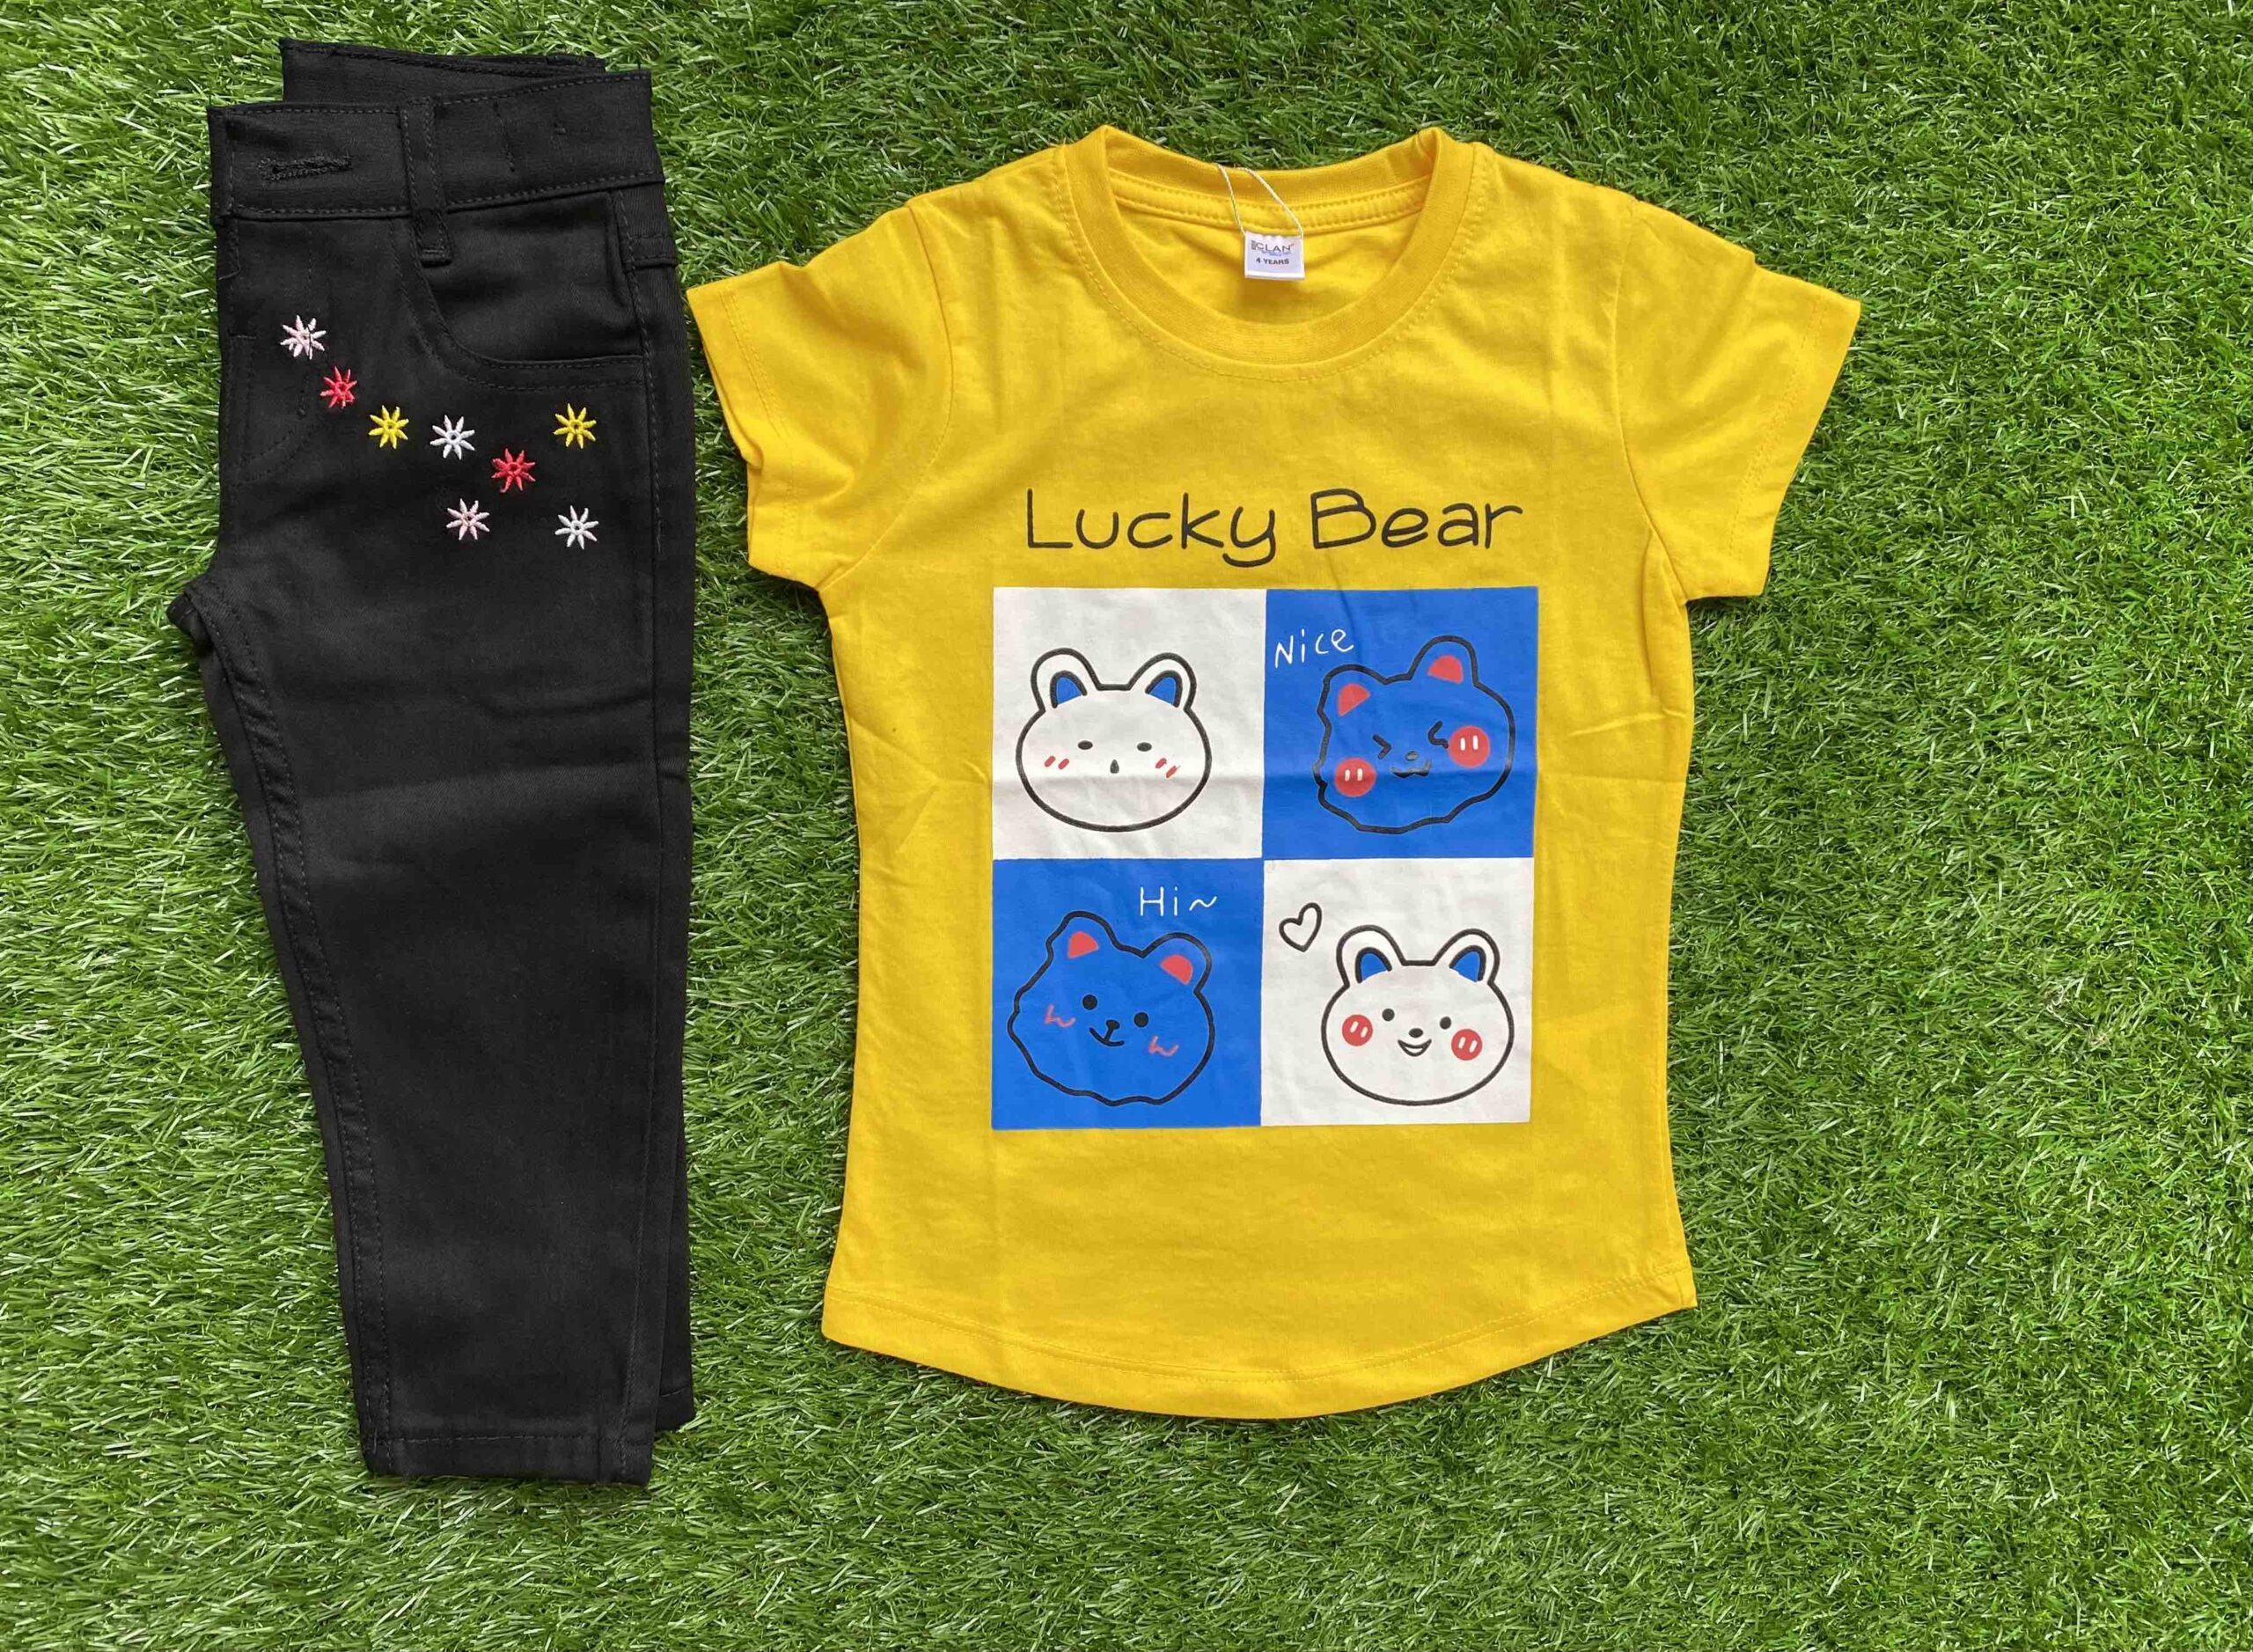 Lucky Bear – Yellow Shirt for Girls Paired with Black Jeans → little legend